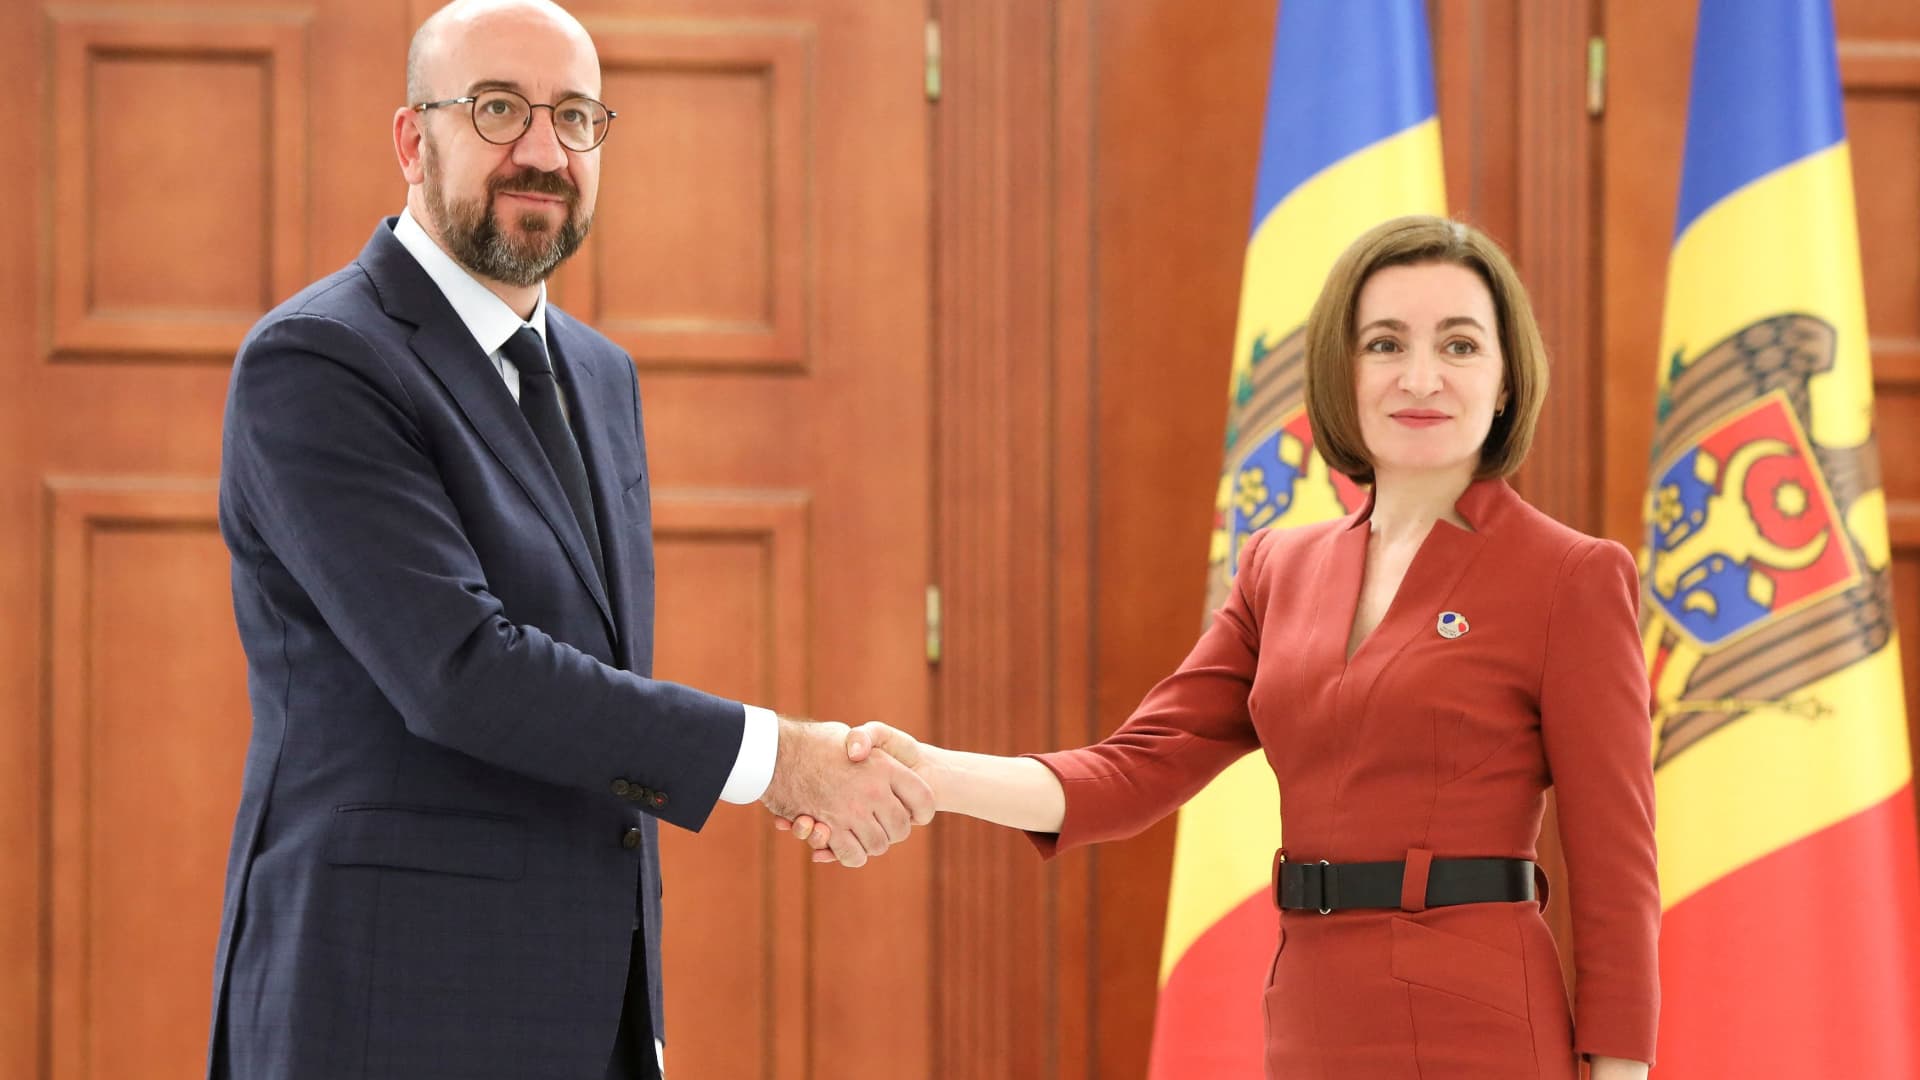 Moldovan President Maia Sandu shakes hands with European Council President Charles Michel during a meeting in Chisinau, Moldova May 4, 2022. 